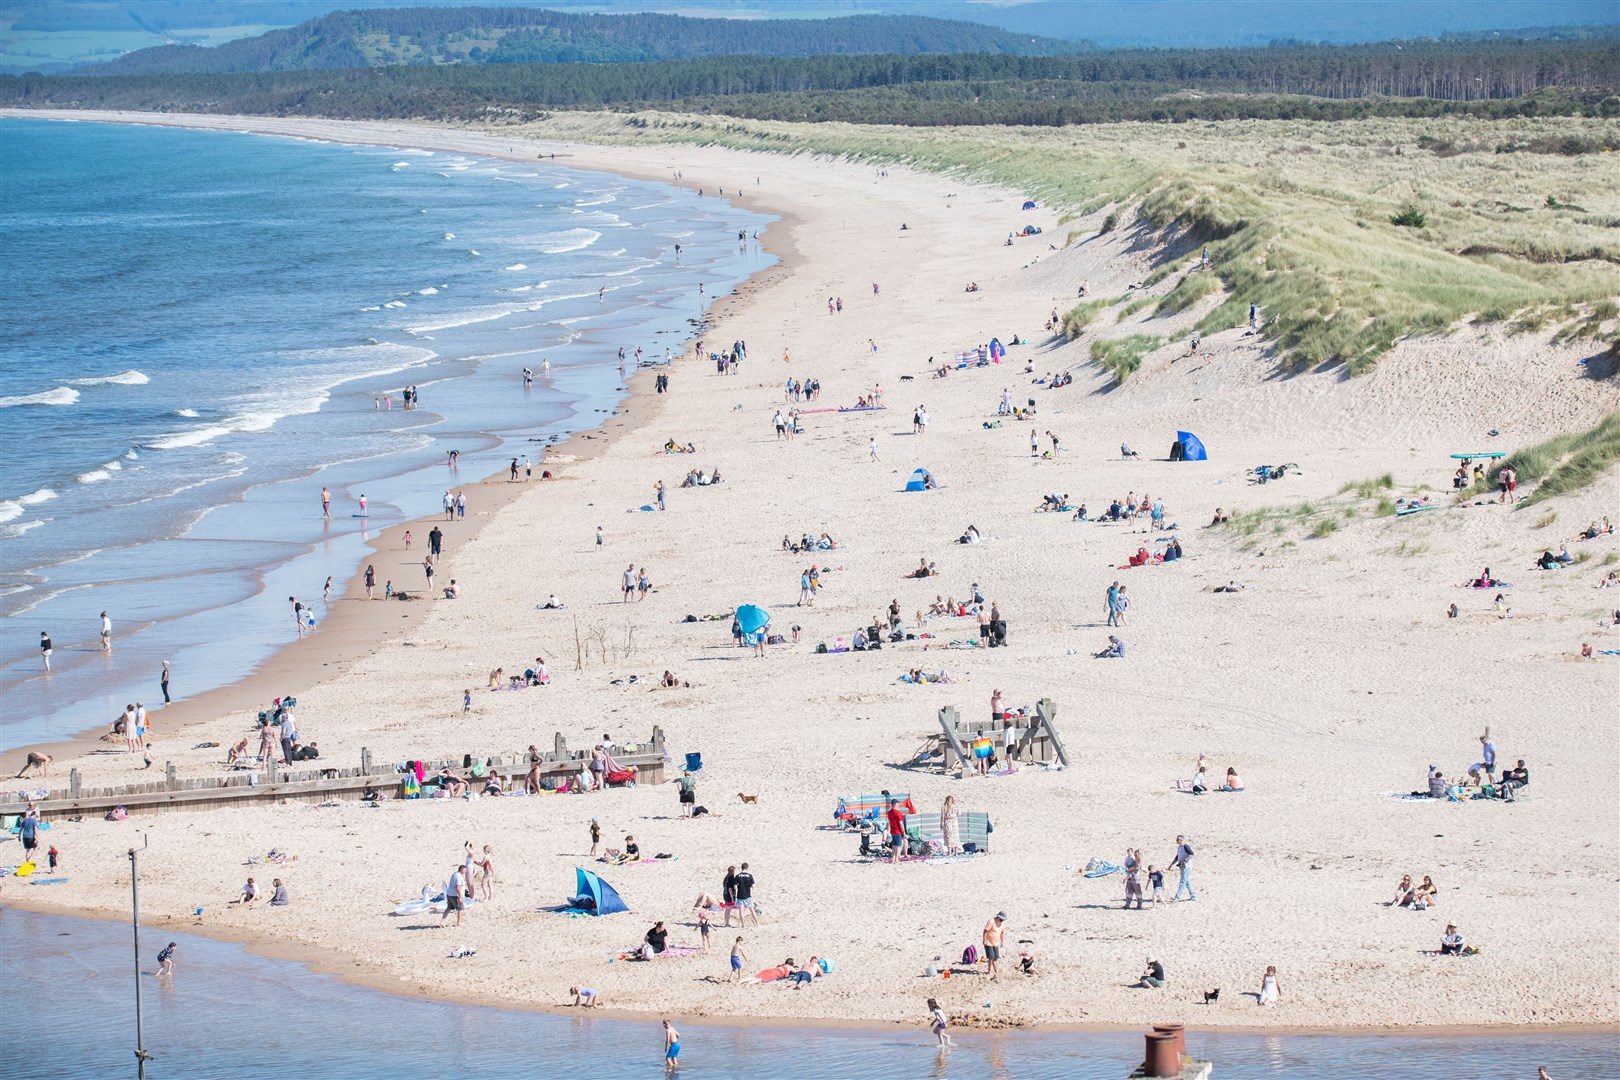 The East beach has been busy since the new bridge opened. Picture: Daniel Forsyth